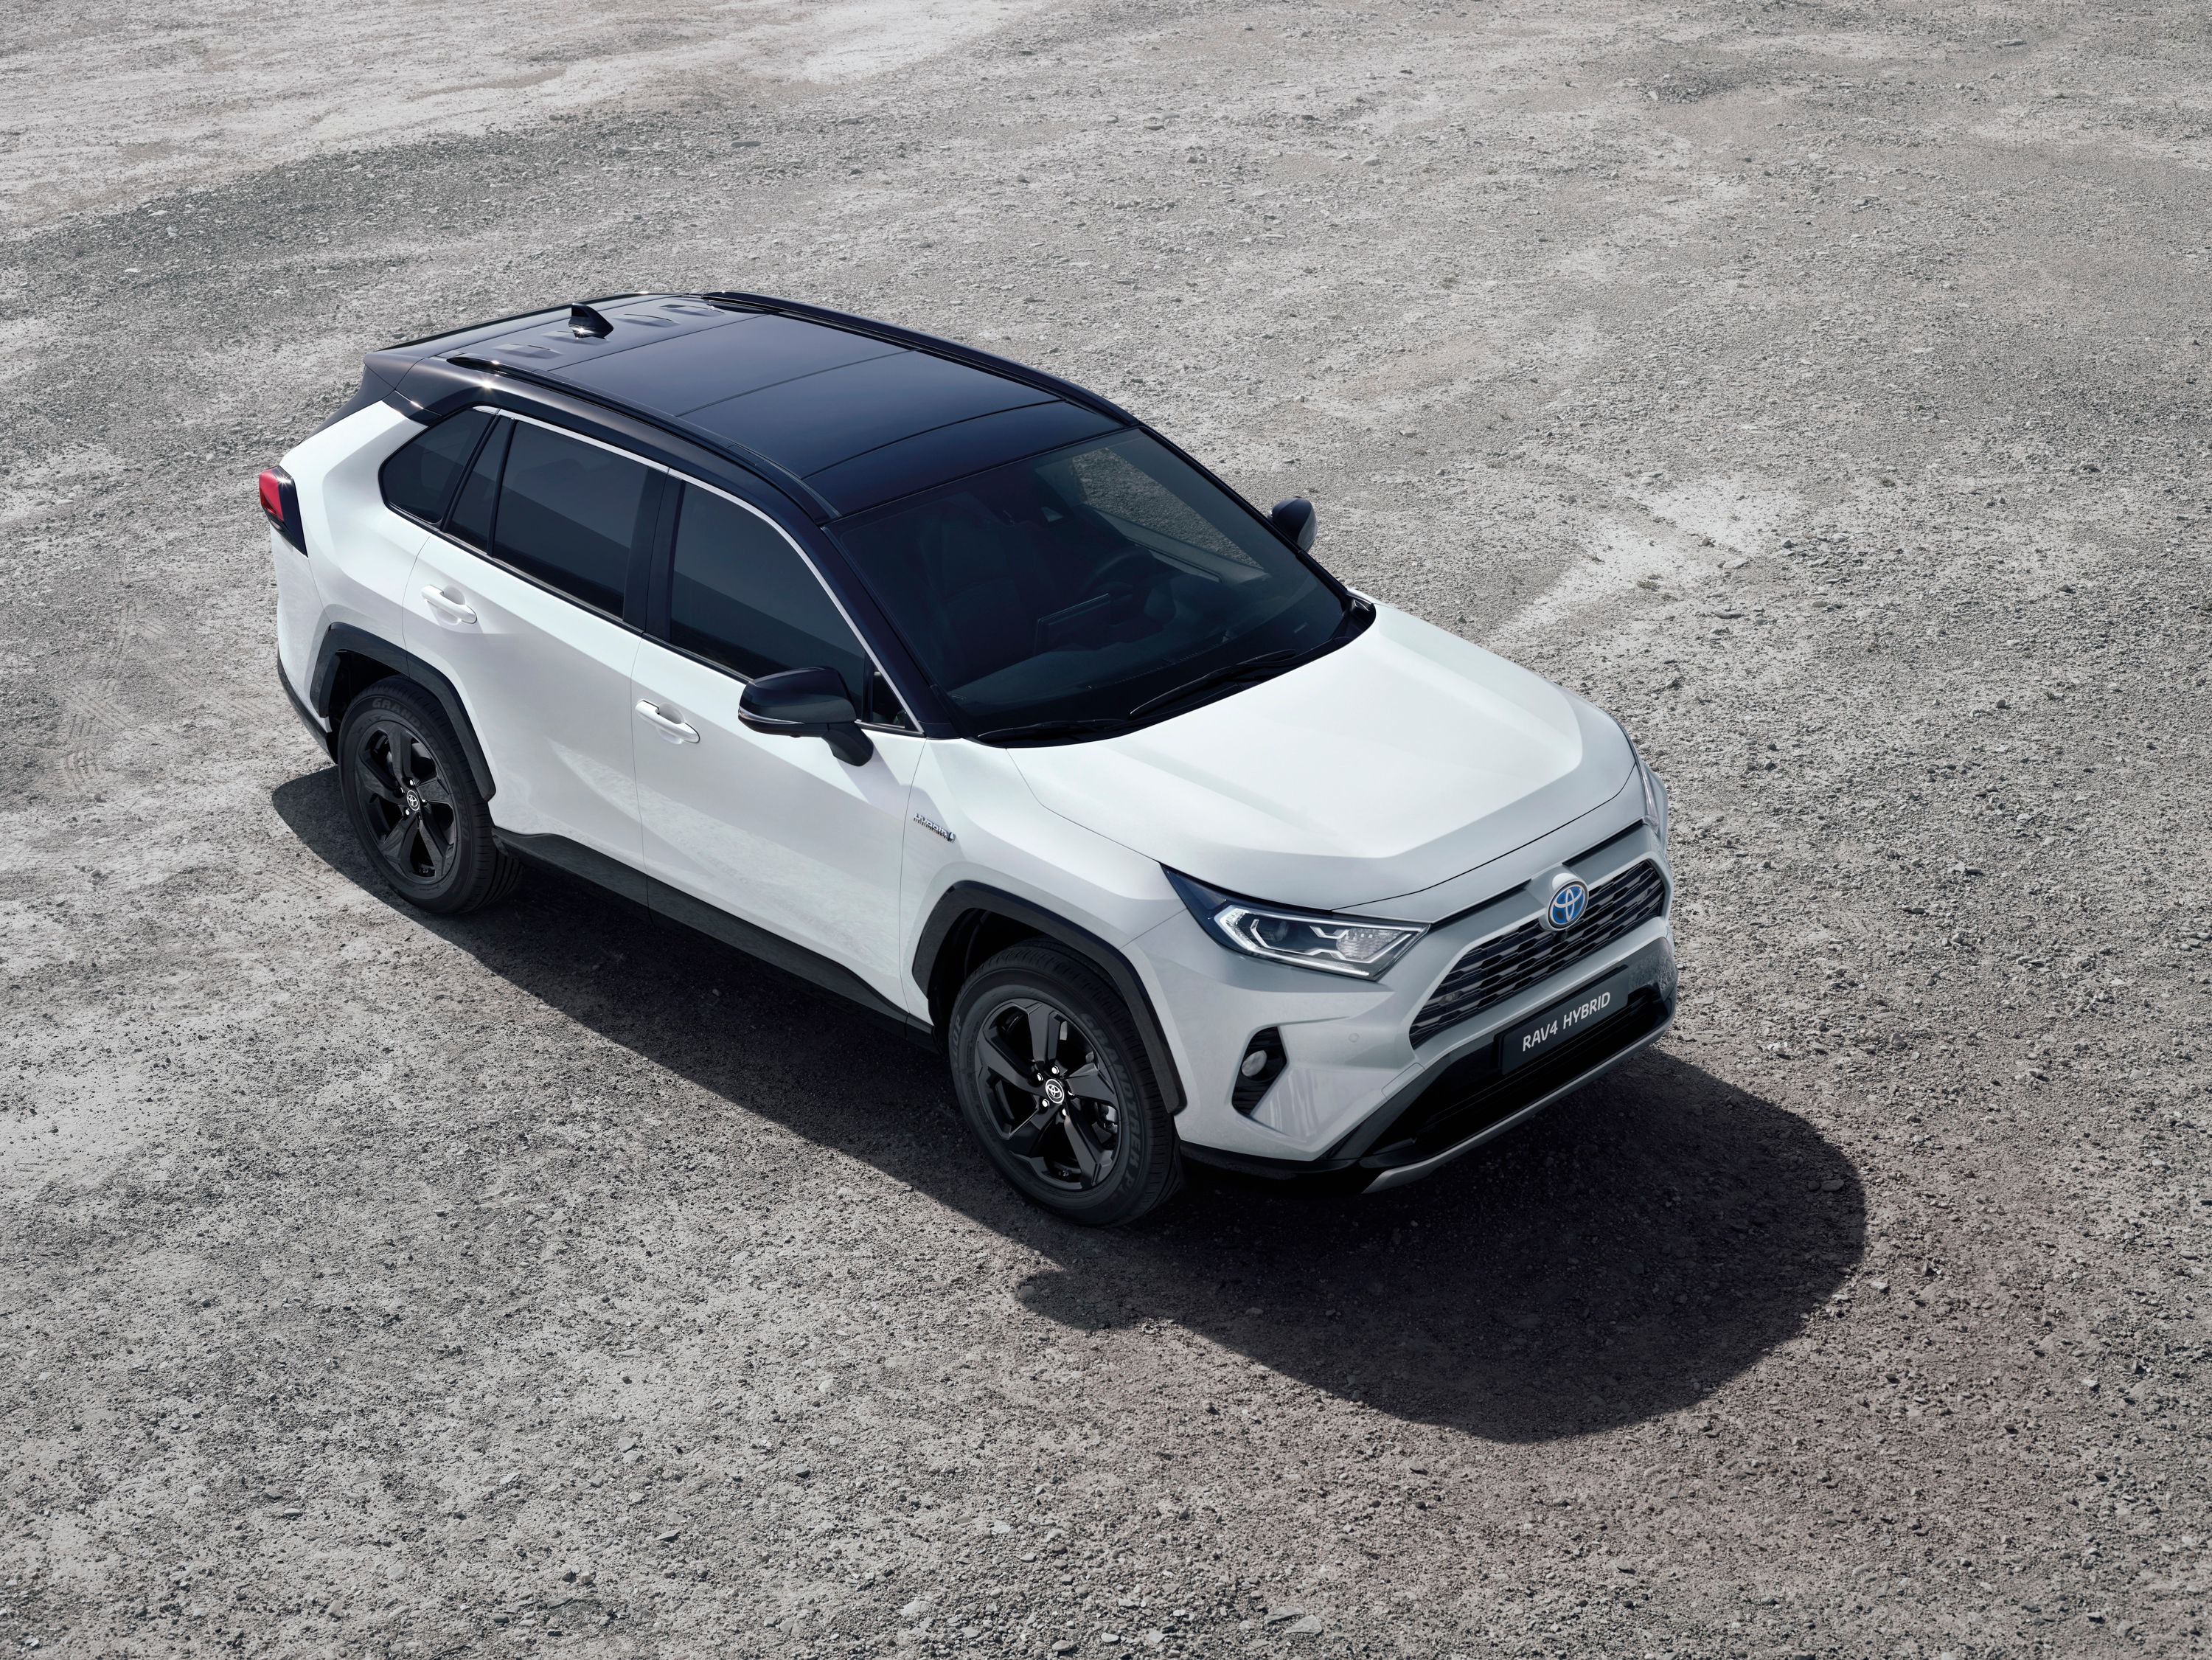 2019 The 2019 Toyota RAV4 Hybrid Proves Efficiency Can Look Good at the Paris Motor Show